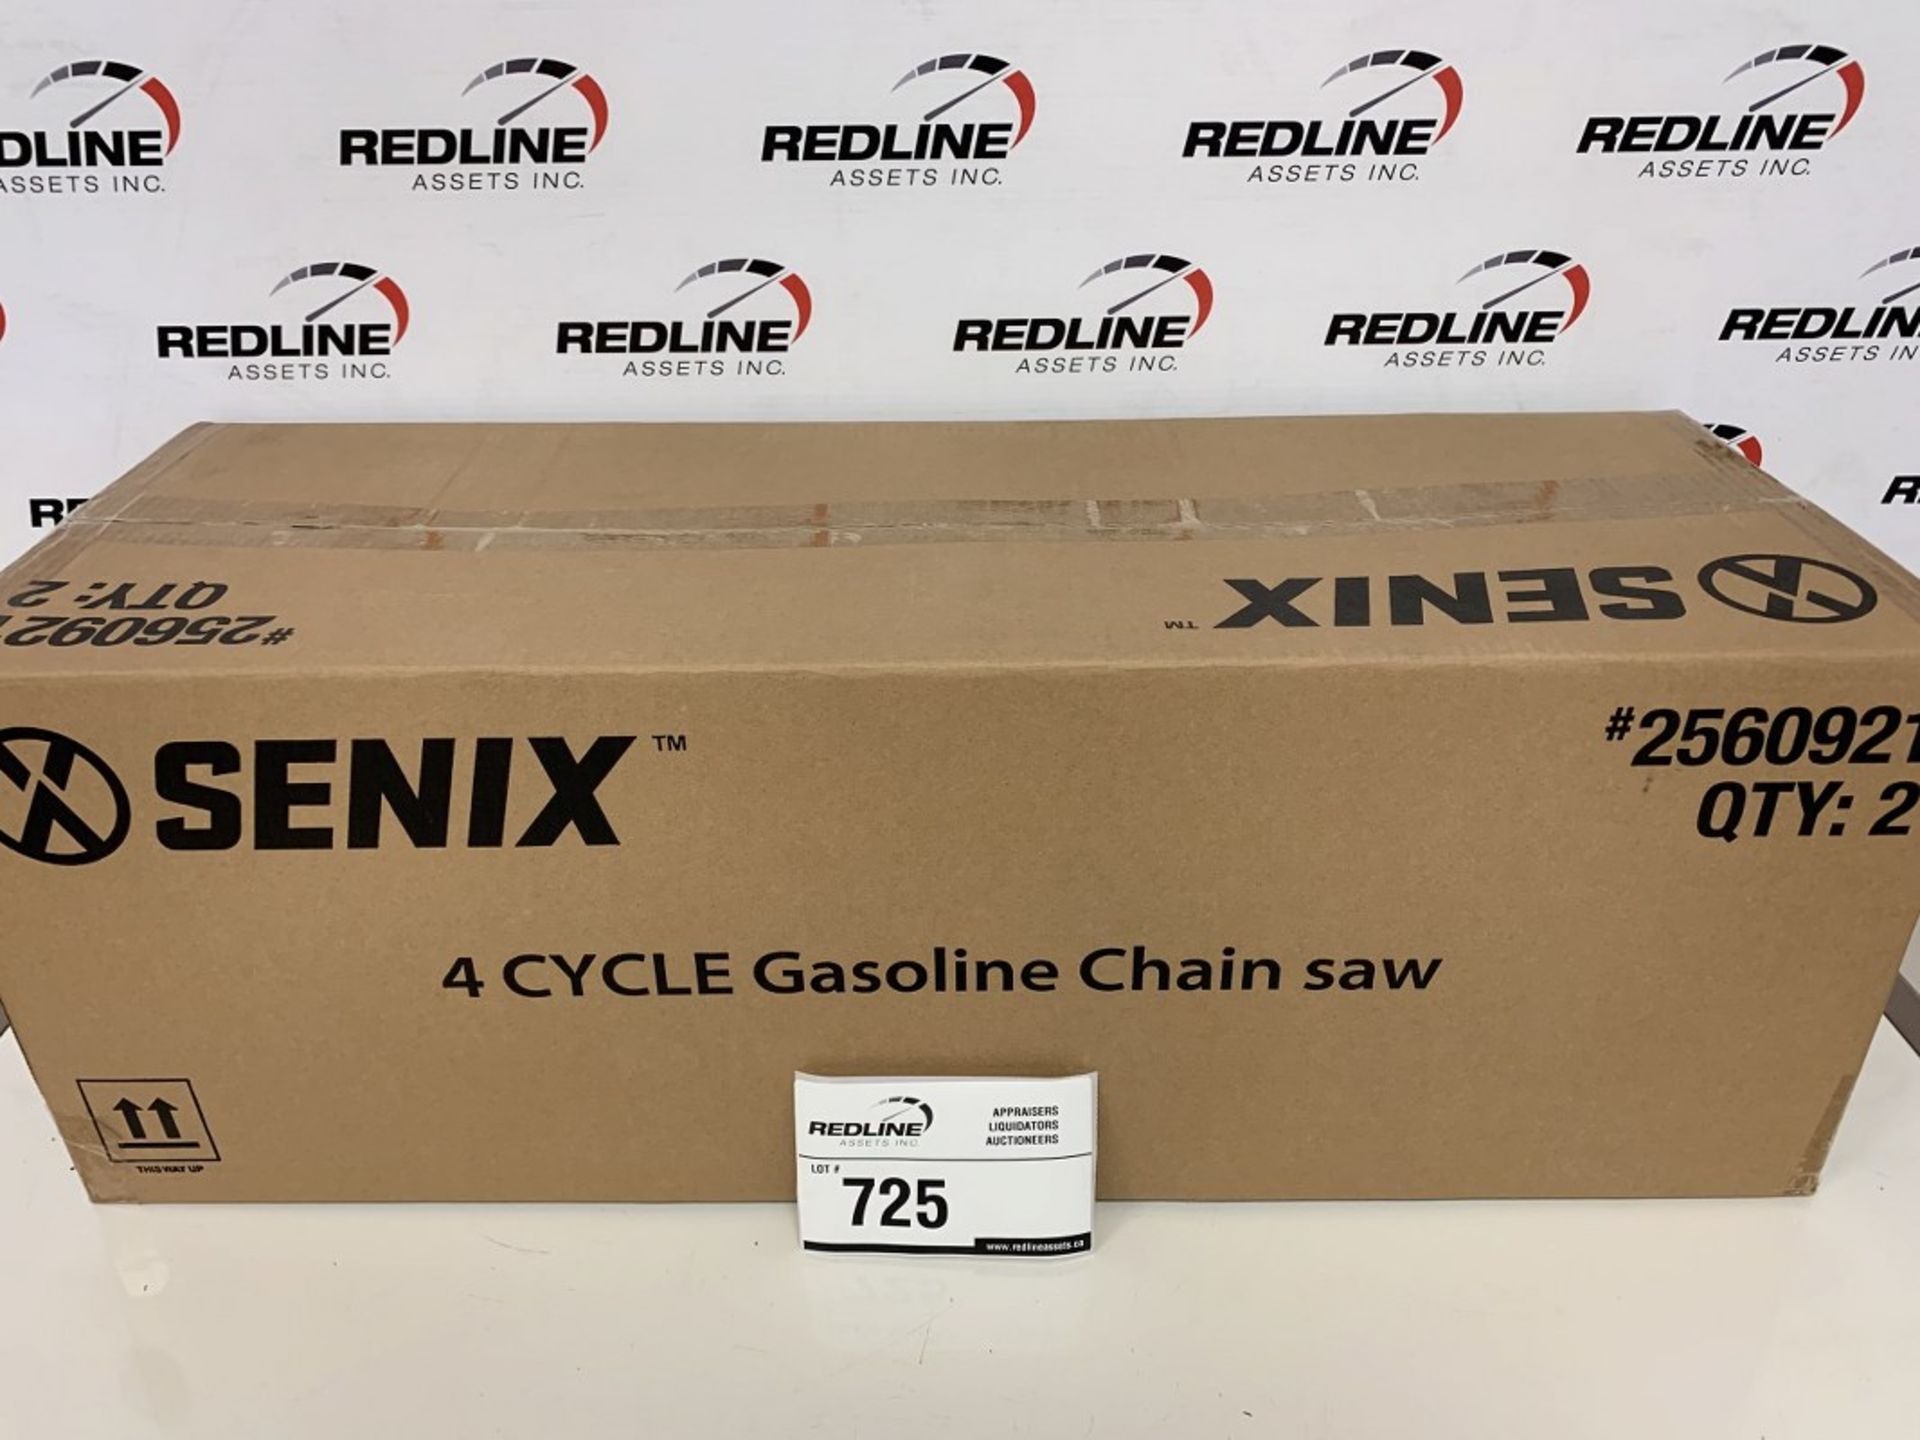 Senix - 18" 4 Cycle Gasoline Chainsaw - Image 2 of 3